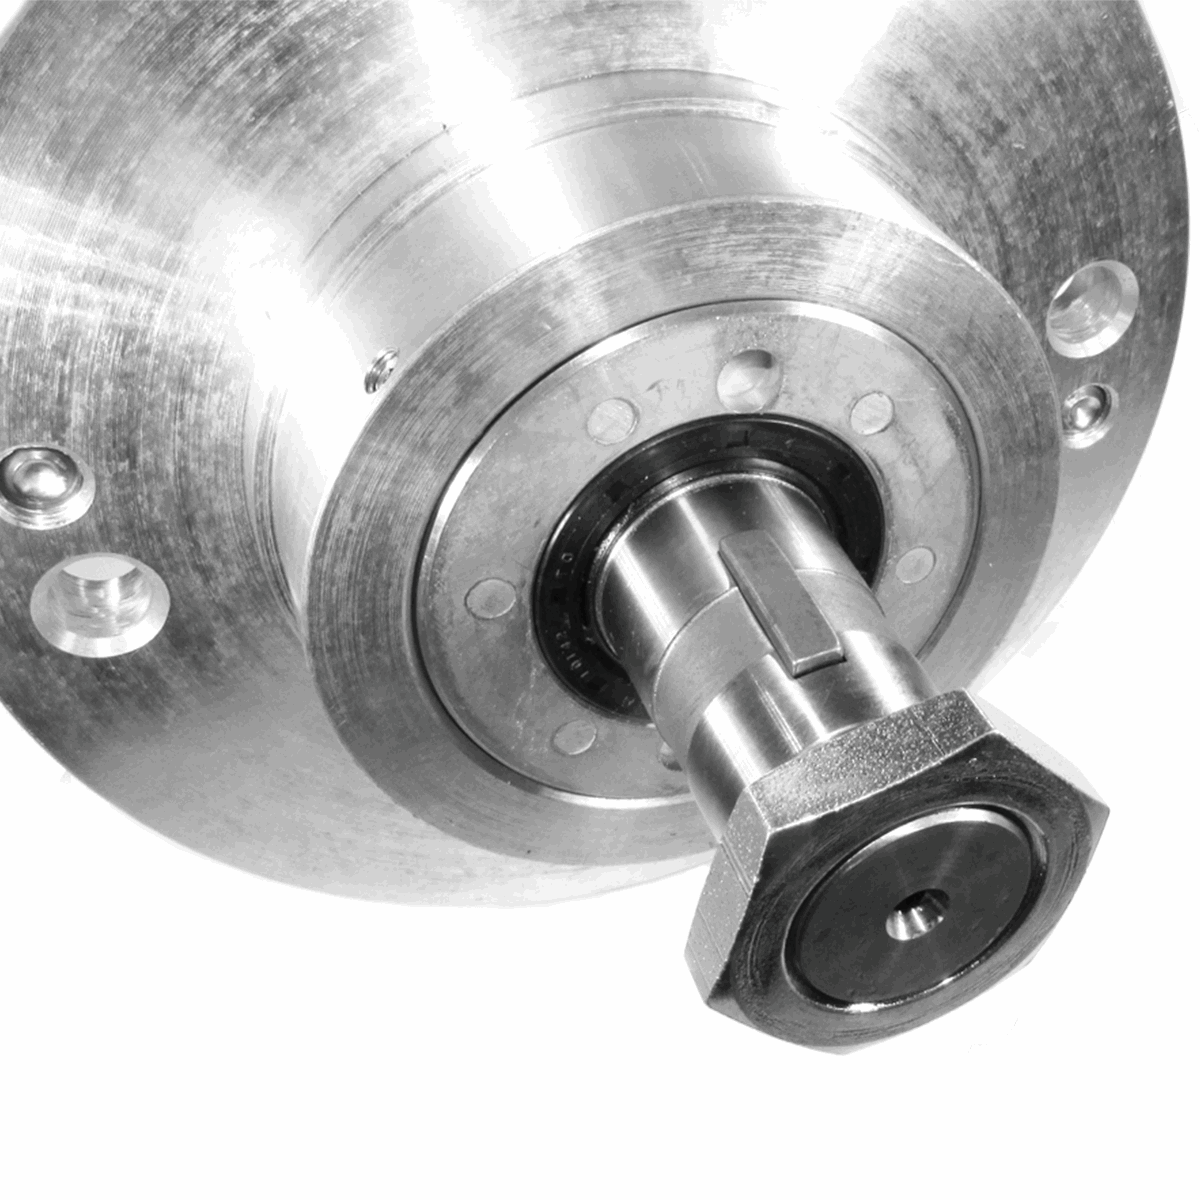 Lower Bearing Housing Assembly, Straight Shaft, Fitting Biro Saws 33, 3334, 3334FH. Replace A16360 top shaft view